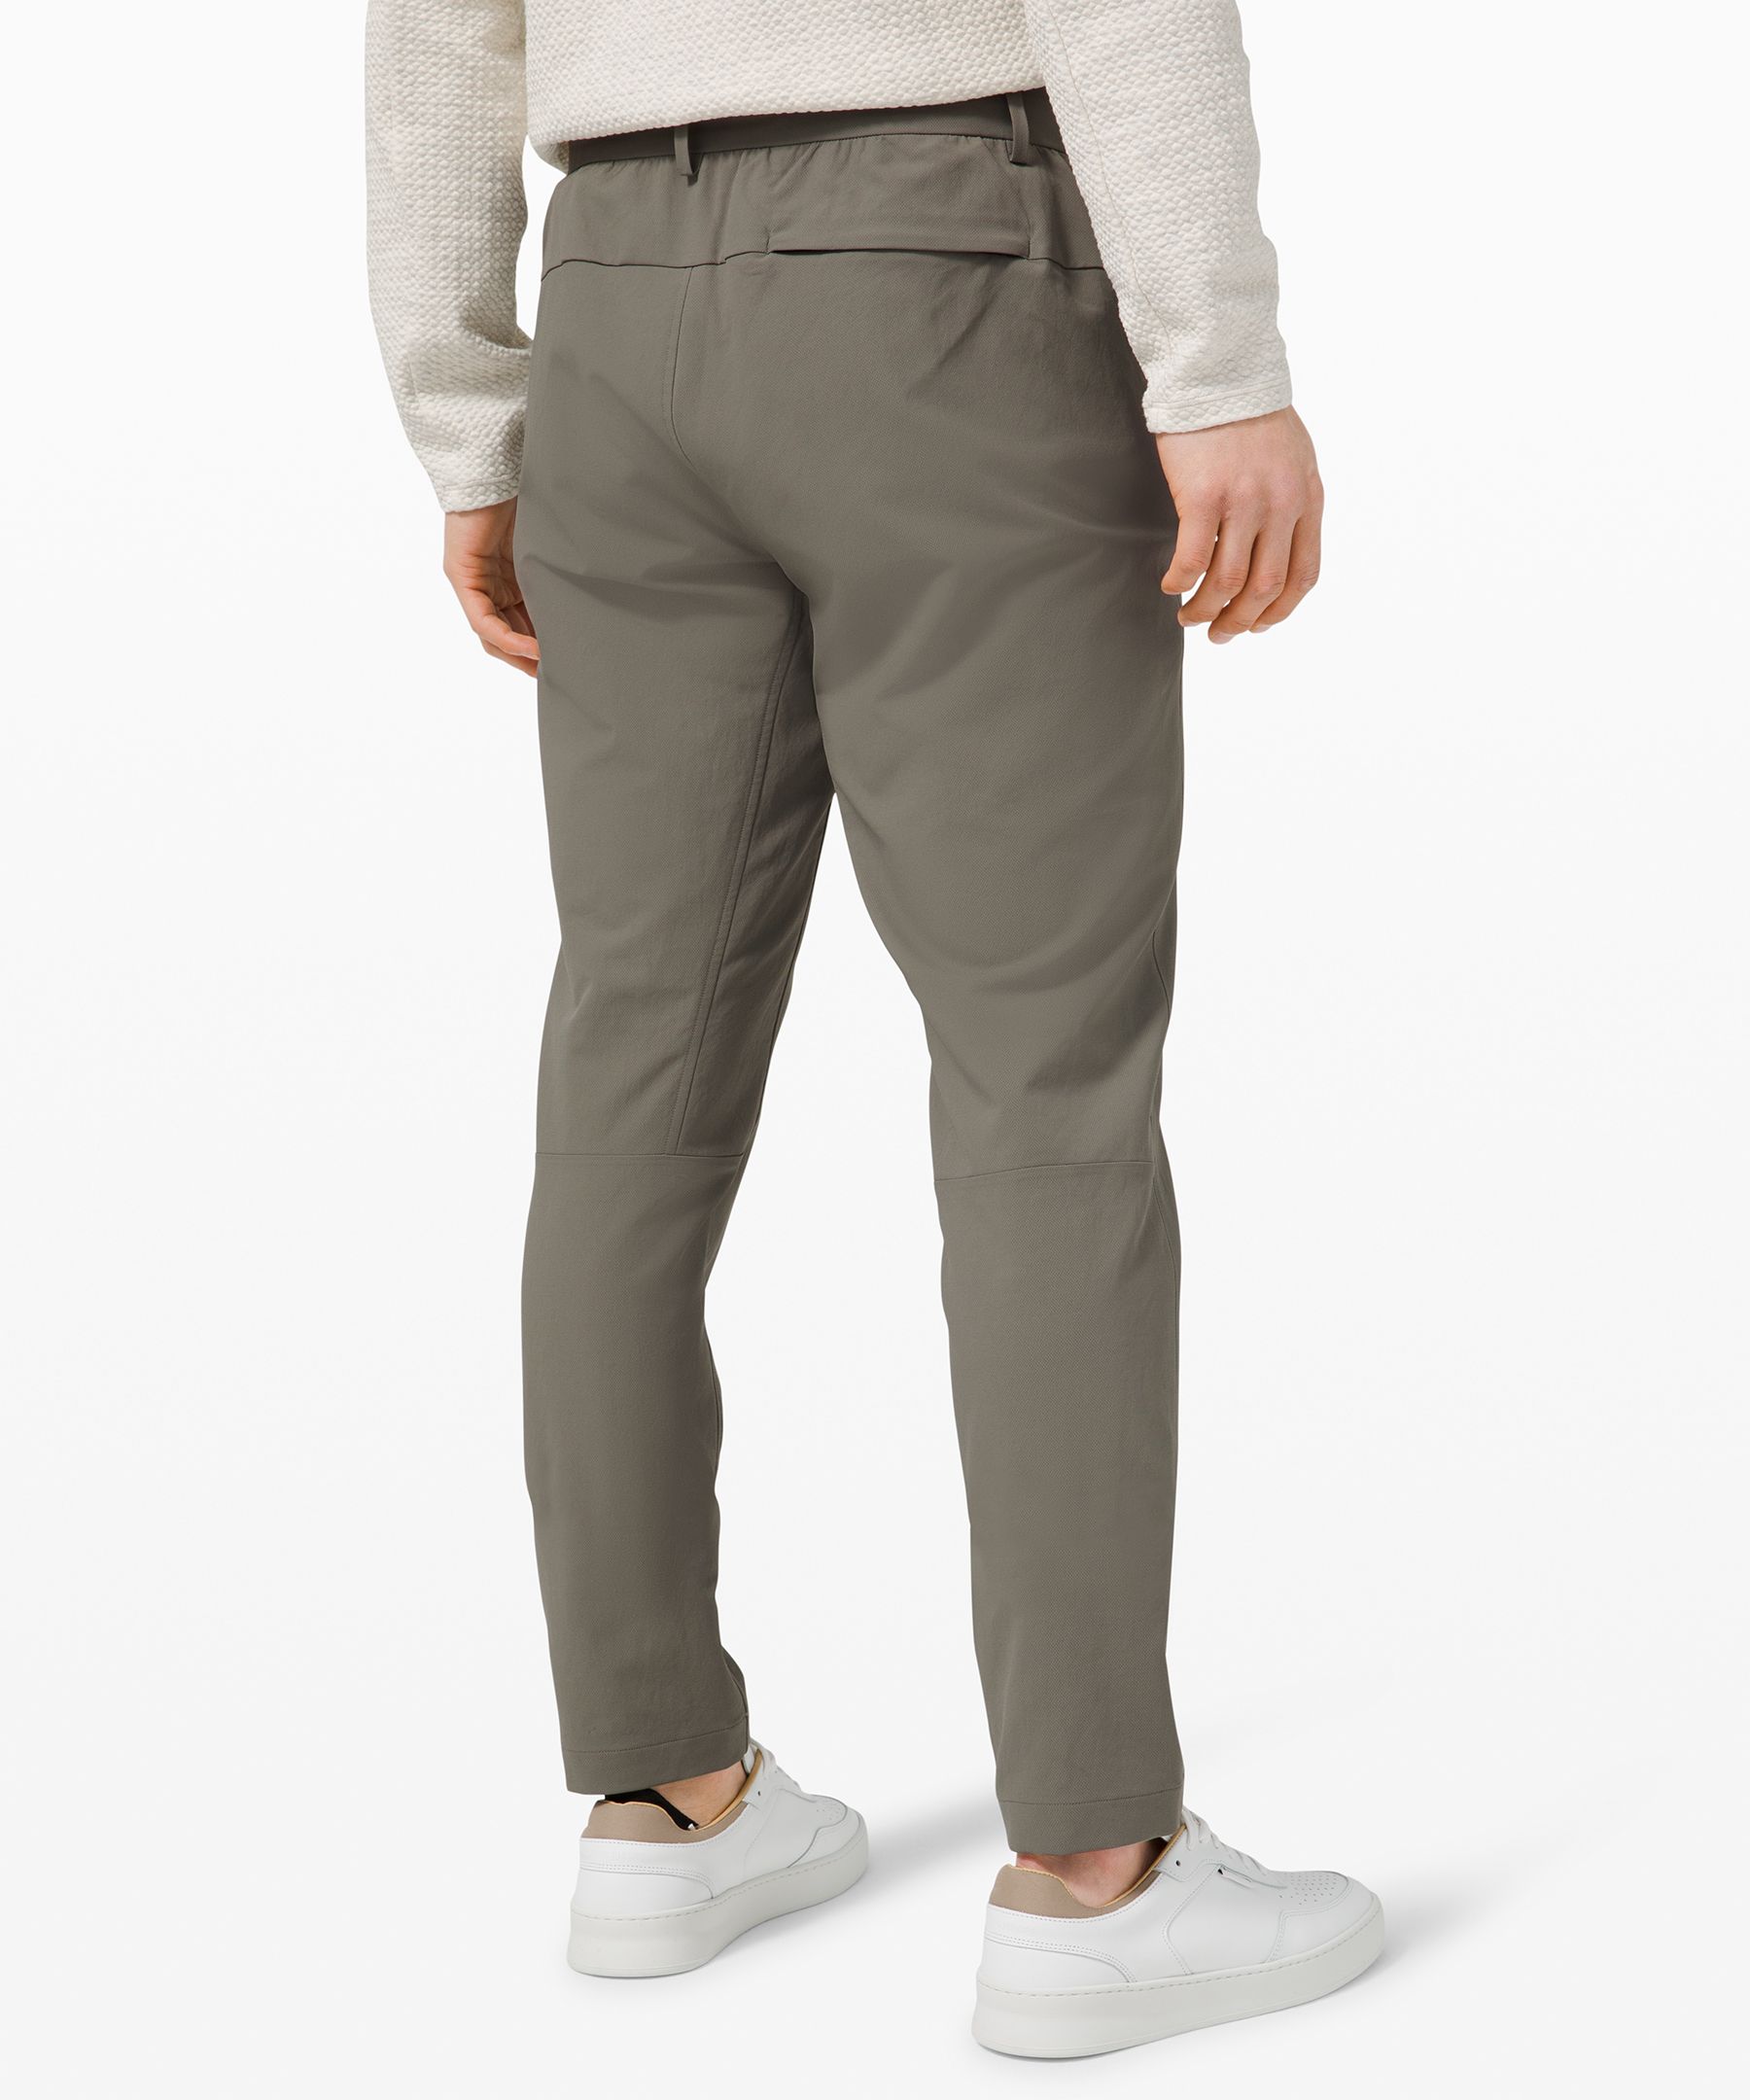 Lululemon Groove Pants Review Journal  International Society of Precision  Agriculture